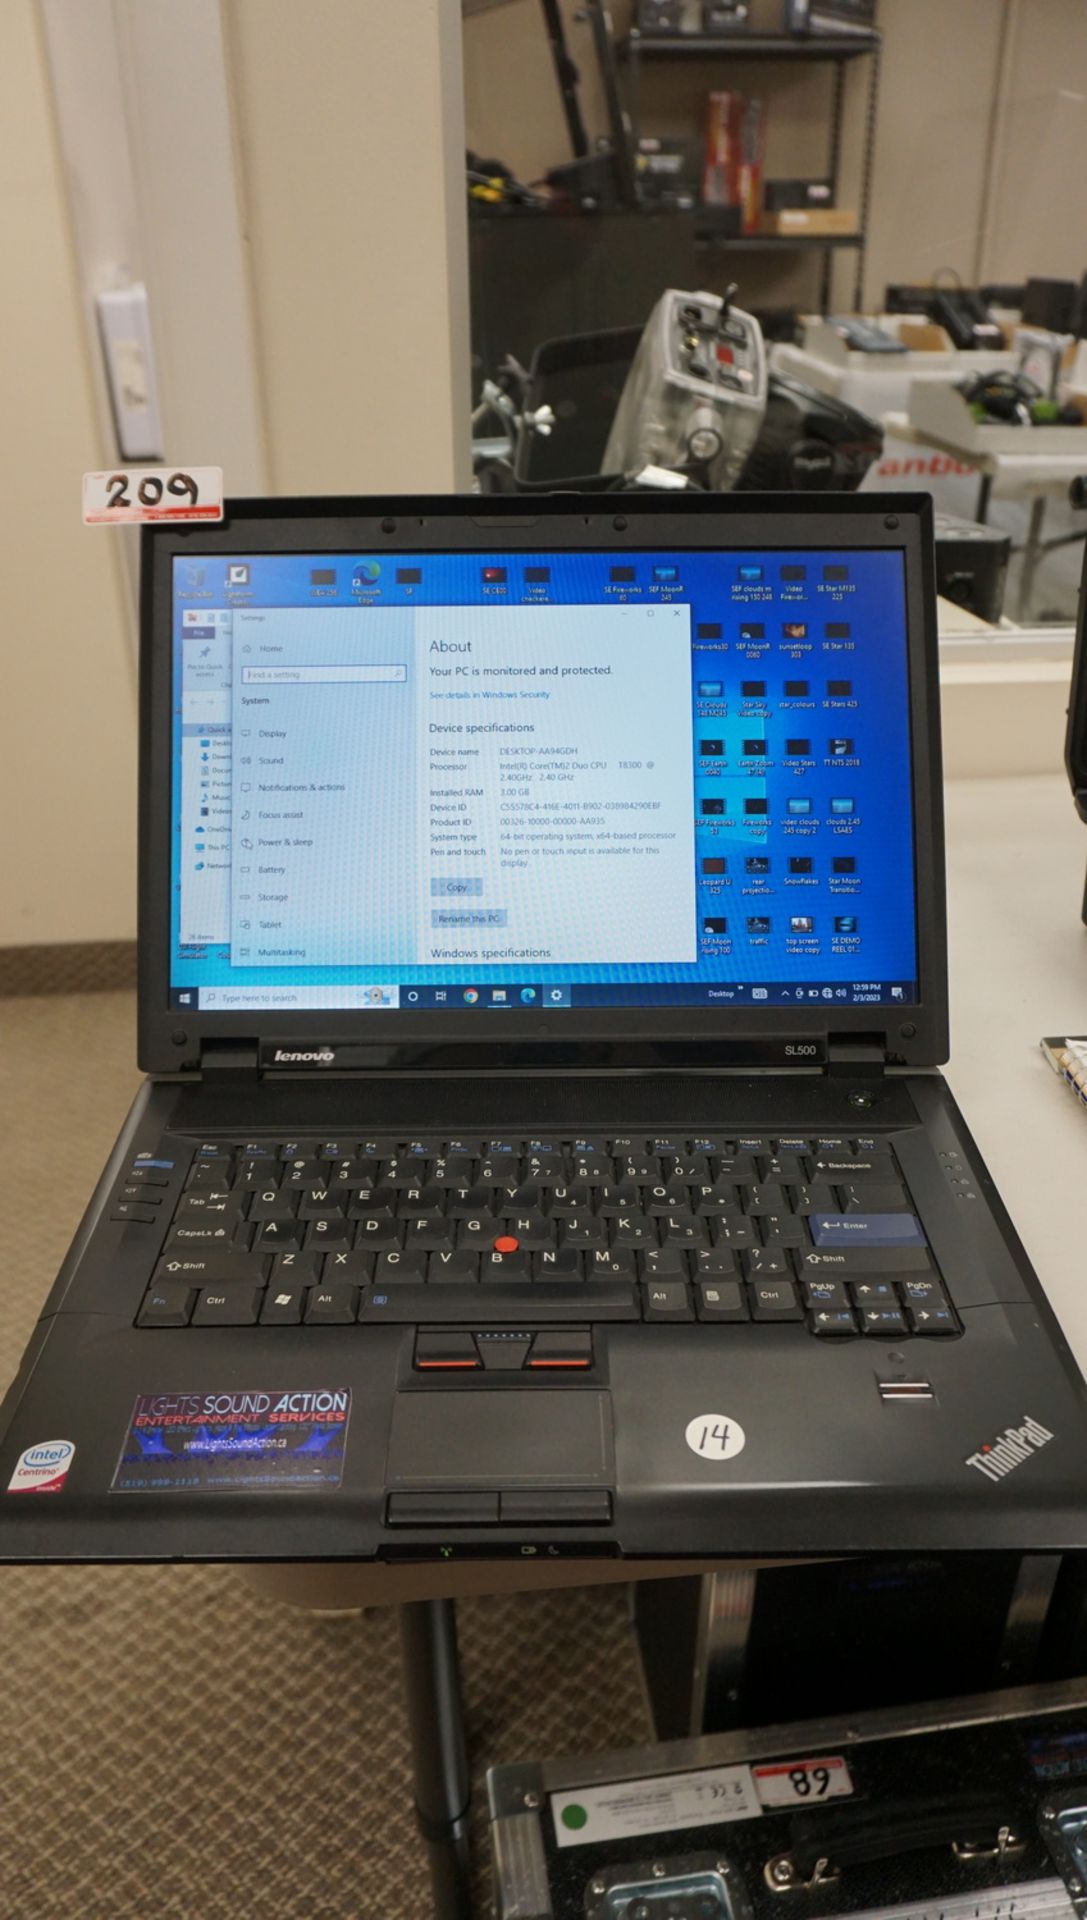 LENOVO SL500 LAPTOP W/ INTEL CORE 2 DUO 2.4GHZ CPU, 3GB RAM C/W VIDEO SPECIAL EFFECTS CLIPS - Image 4 of 4